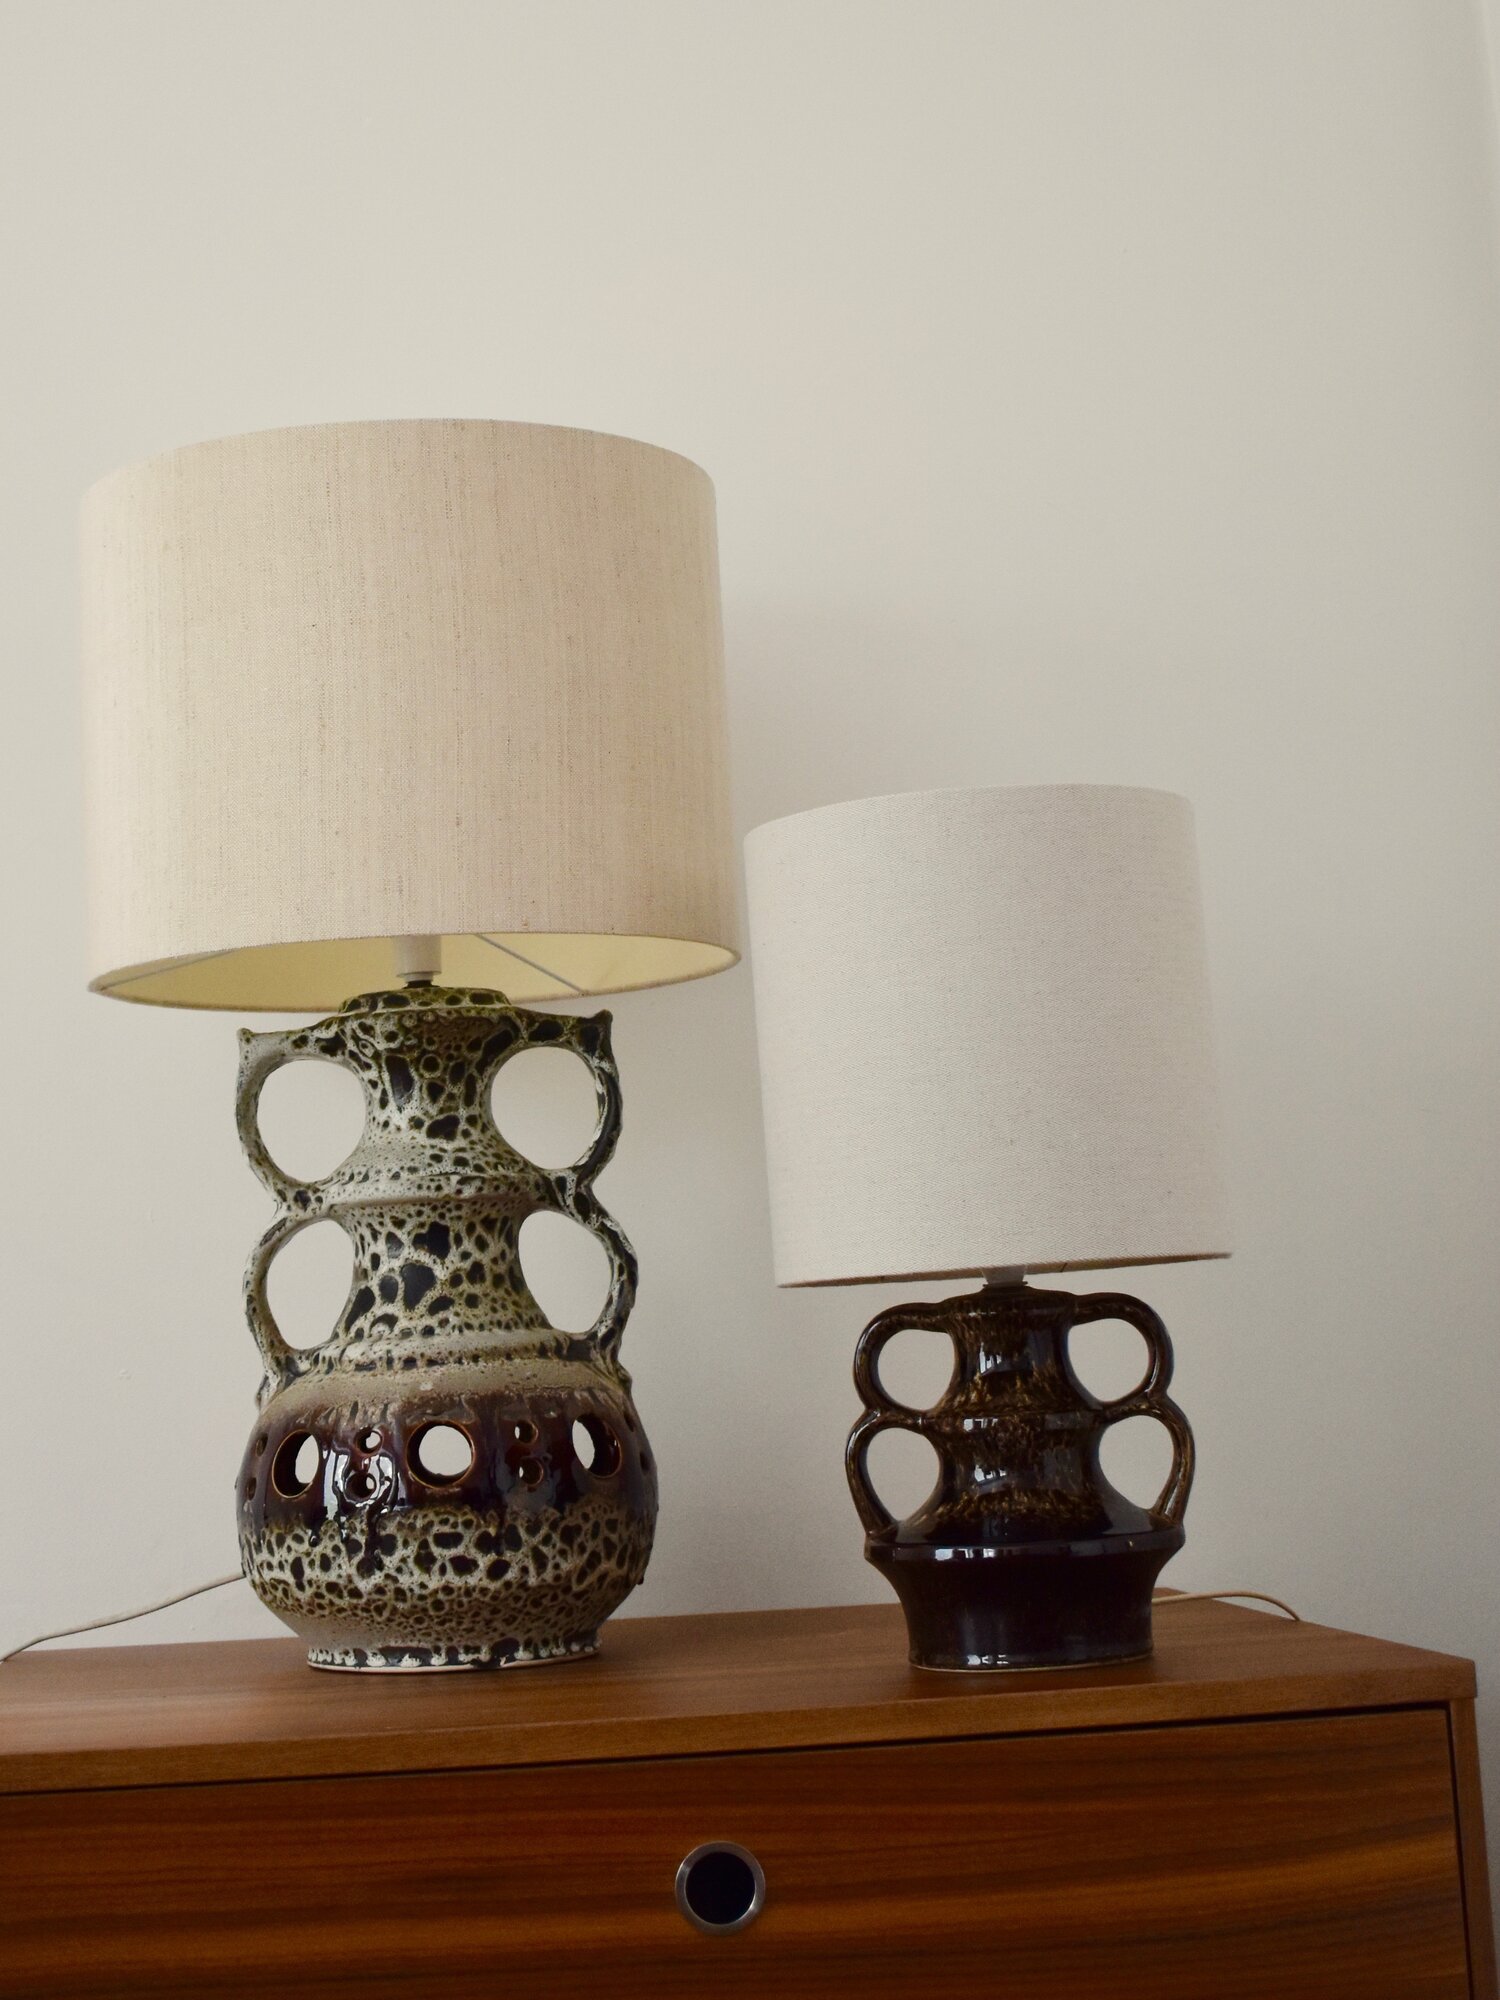 Drum Lamp Shades Feature Lighting Co Uk, Drum Table Lampshades Uk